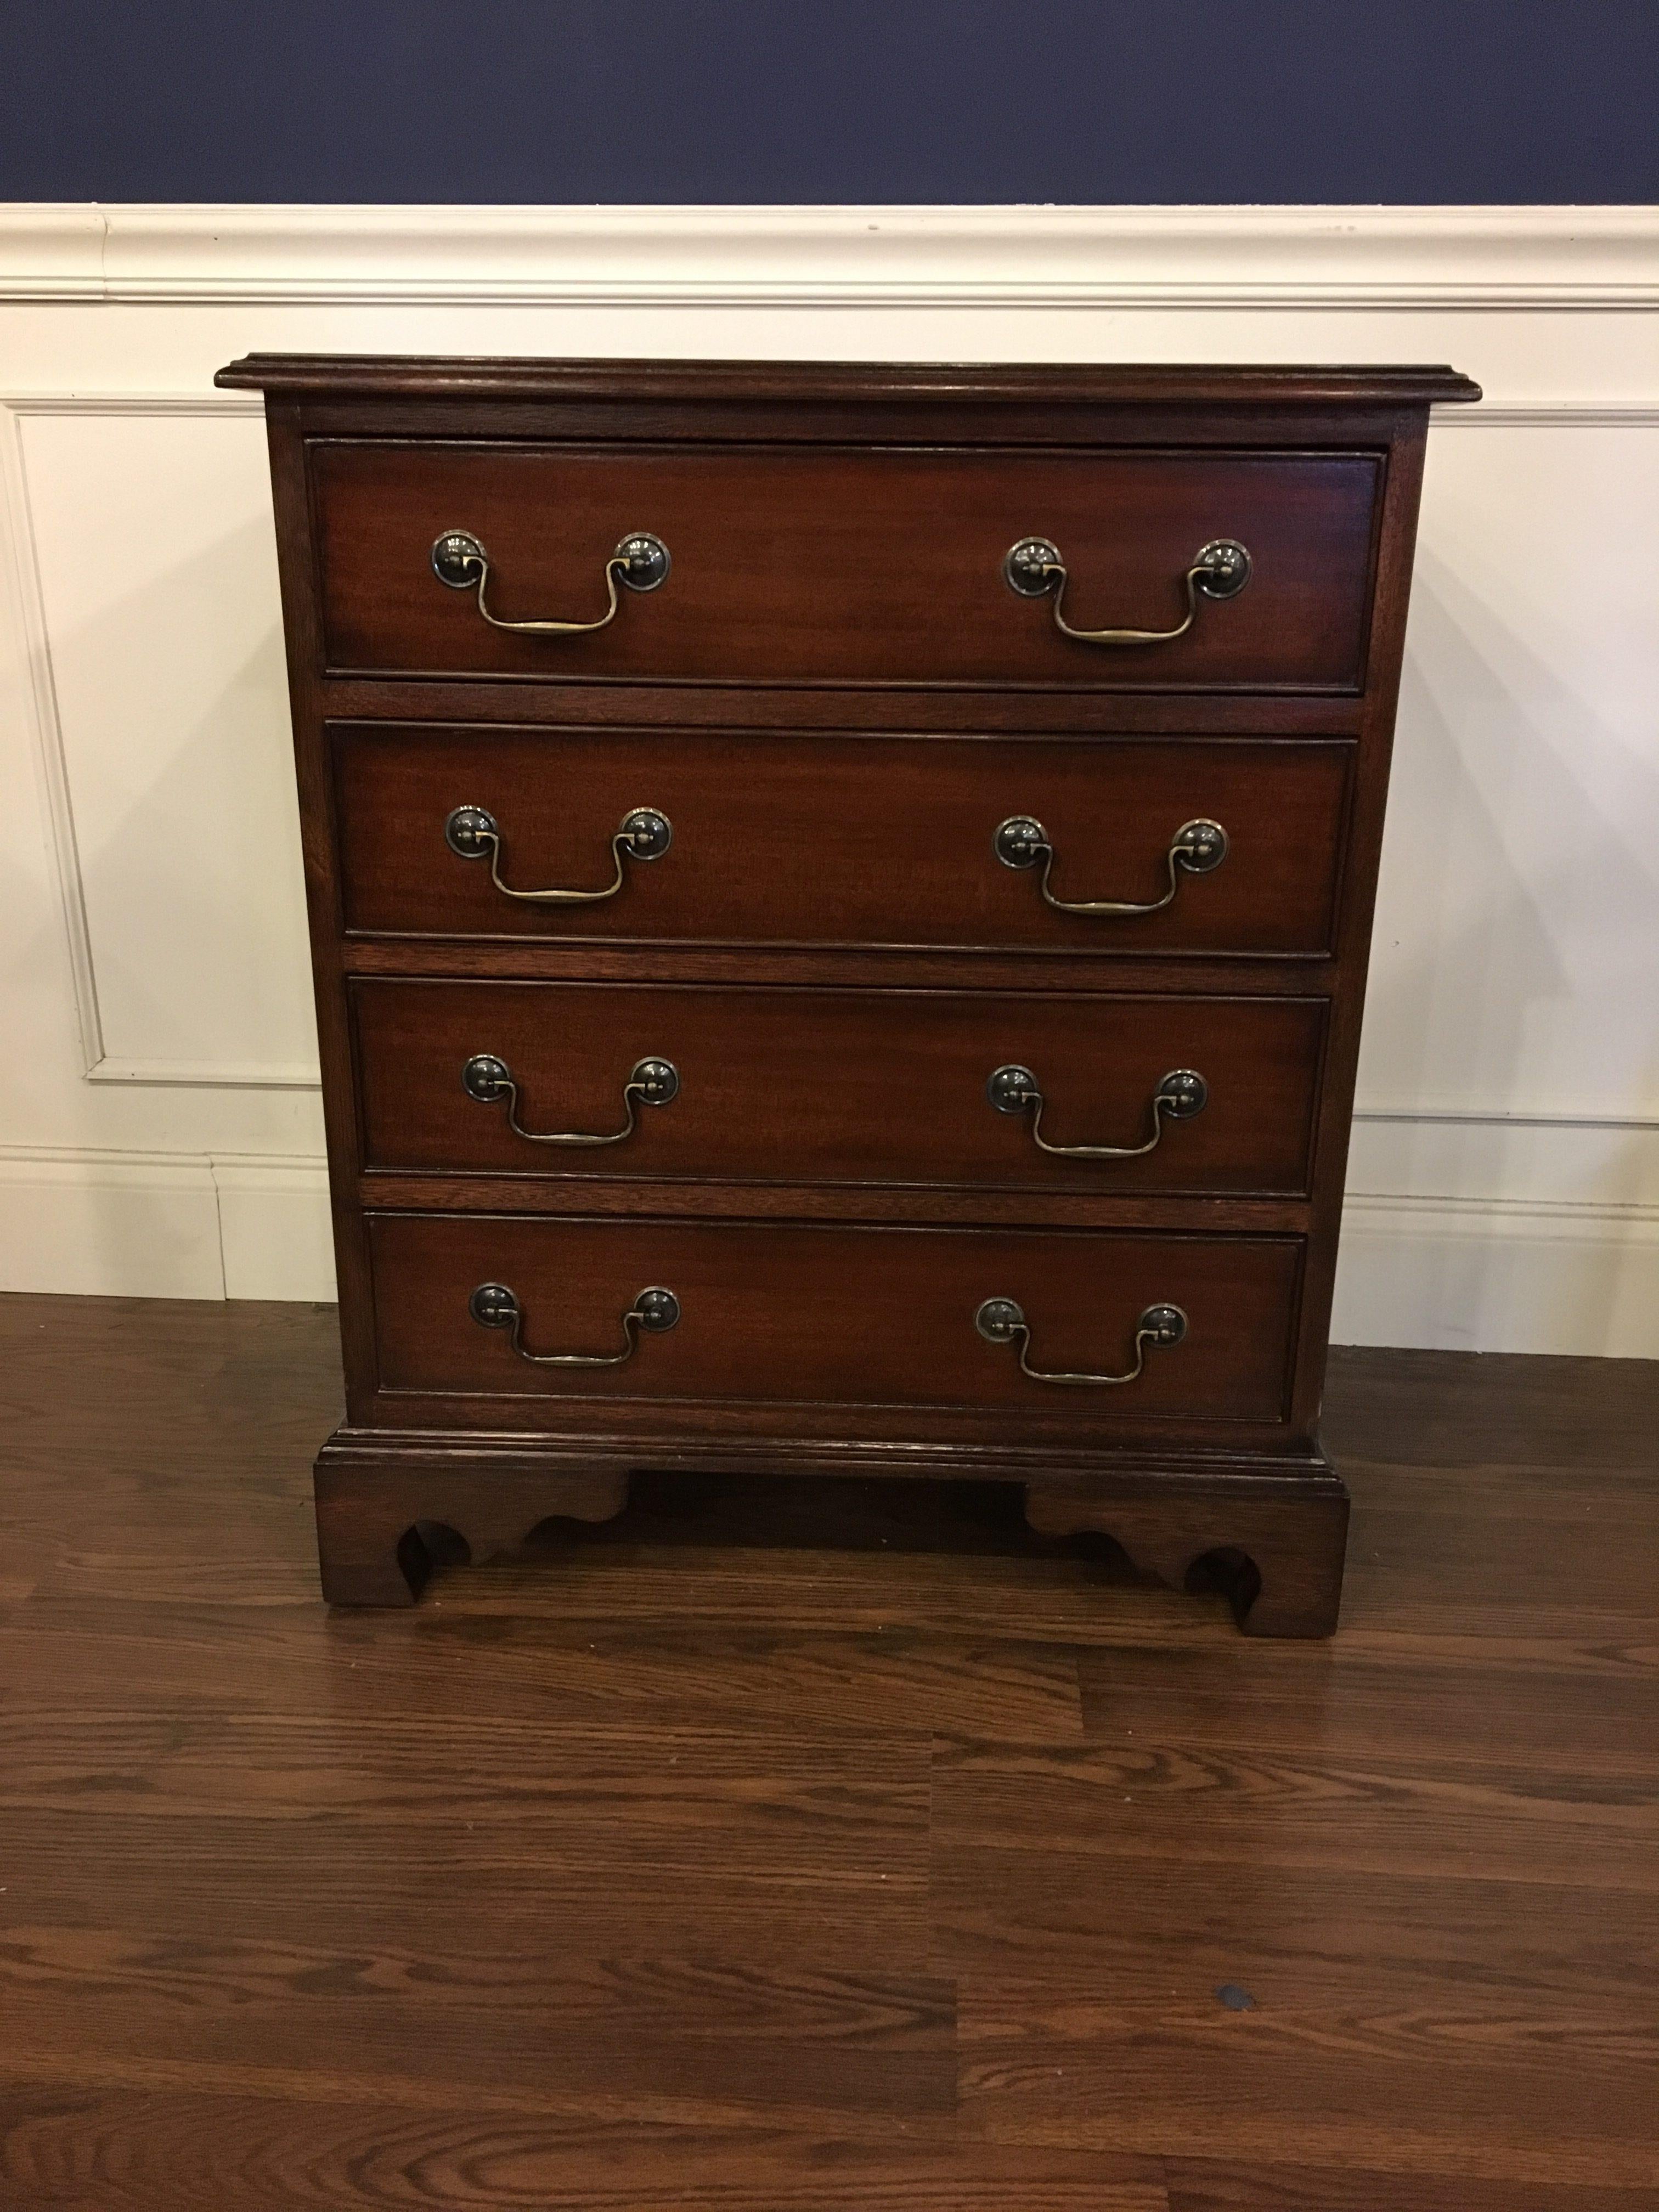 This is a new traditional mahogany nightstand. Its design was inspired by New England nightstands in the 1800s. It features four drawers and straight grain mahogany drawer fronts, top and sides with a Classic solid mahogany ogee edge. The drawers